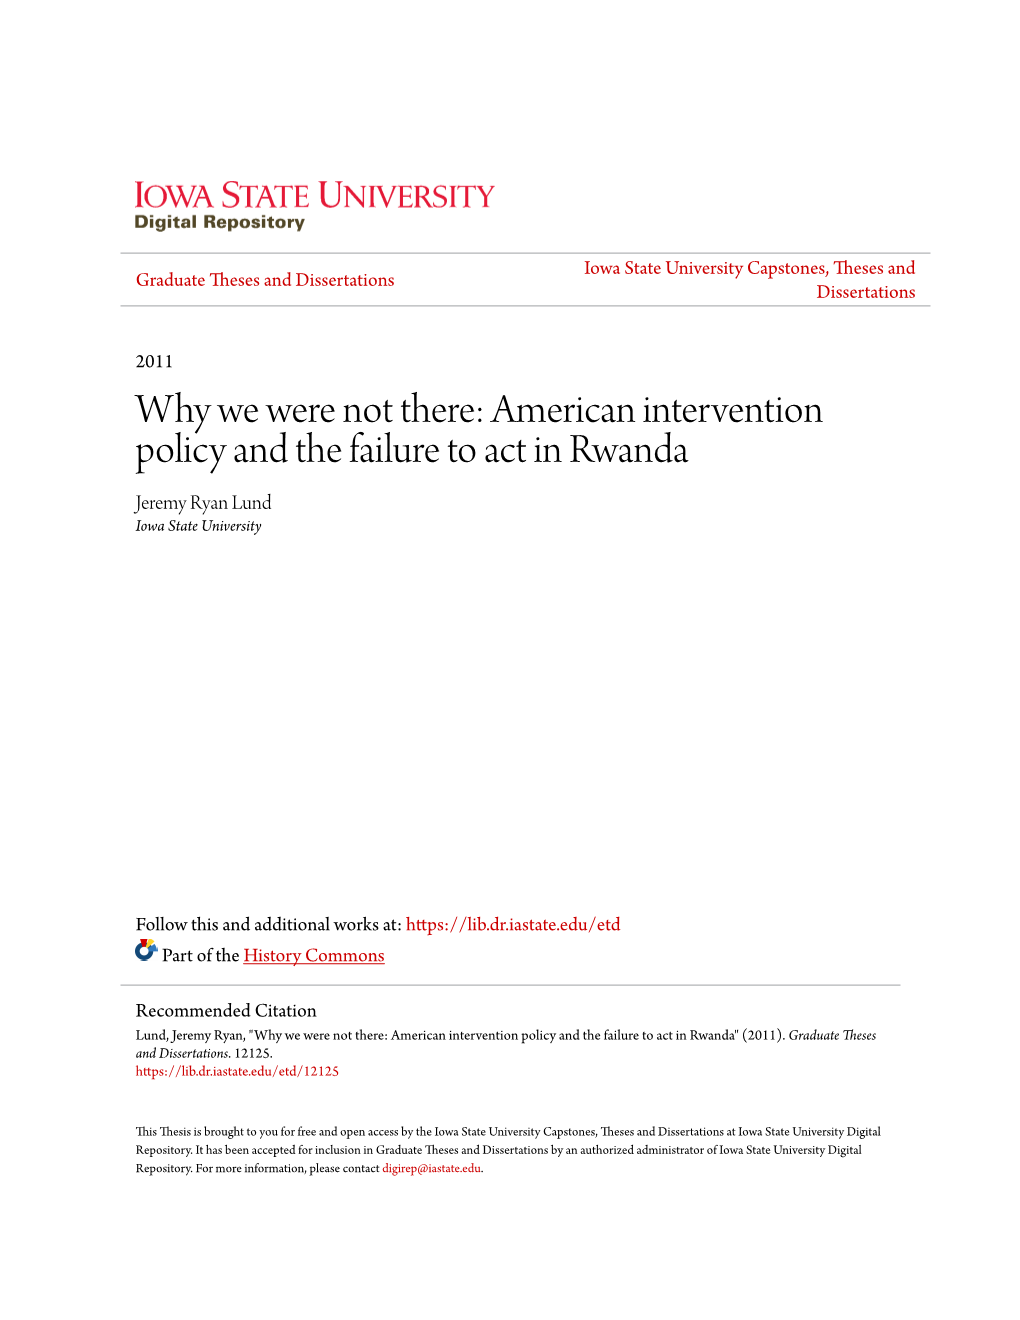 American Intervention Policy and the Failure to Act in Rwanda Jeremy Ryan Lund Iowa State University